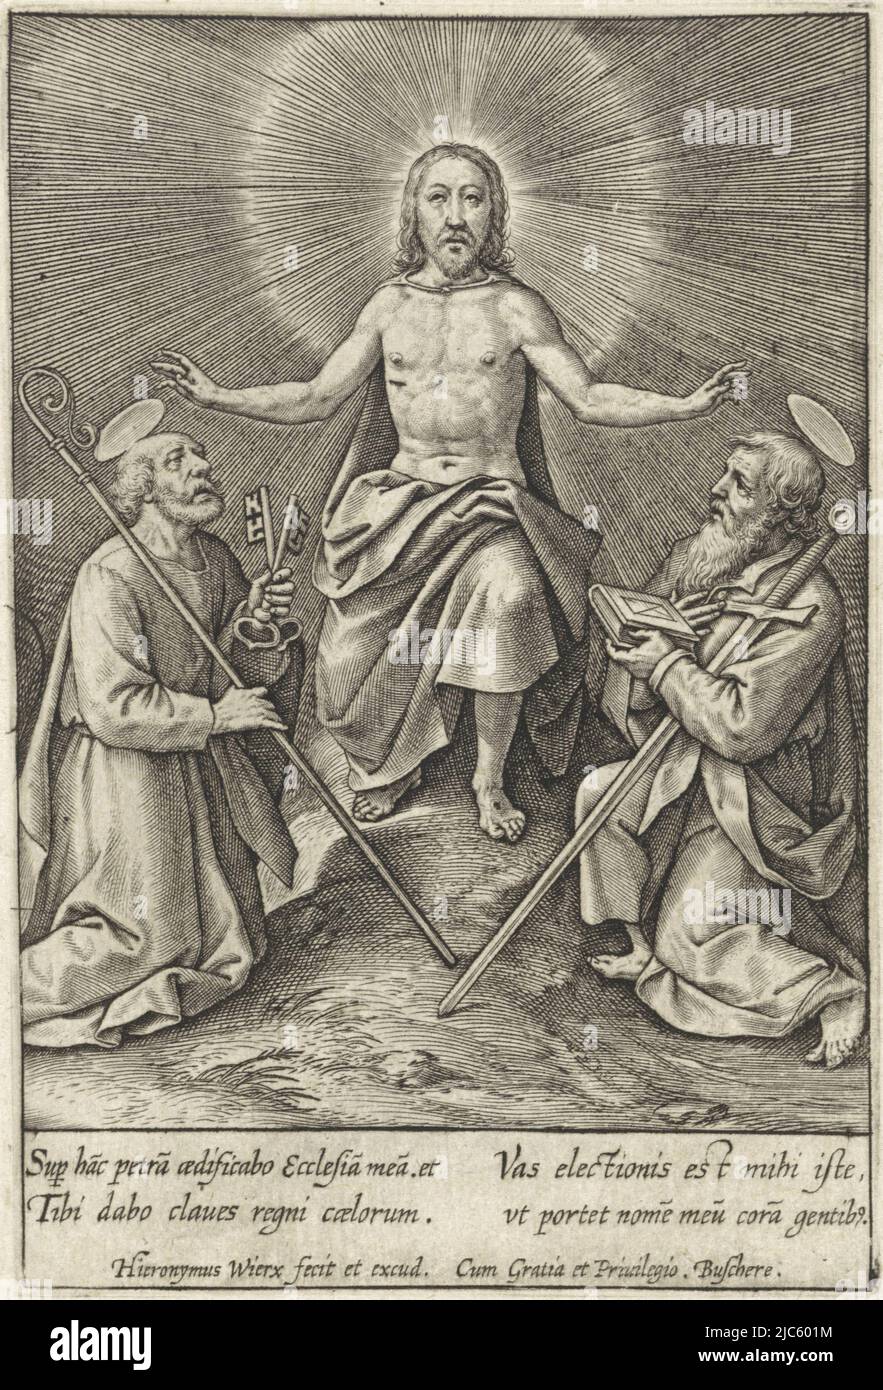 Peter and Paul kneeling in adoration before the resurrected Christ. He blesses them, seated on a knoll. In the margin a four-line caption, in two columns, in Latin., Resurrected Christ with Peter and Paul, print maker: Hieronymus Wierix, (mentioned on object), publisher: Hieronymus Wierix, (mentioned on object), Joachim de Buschere, (mentioned on object), Antwerp, 1563 - before 1619, paper, engraving, h 96 mm × w 65 mm Stock Photo